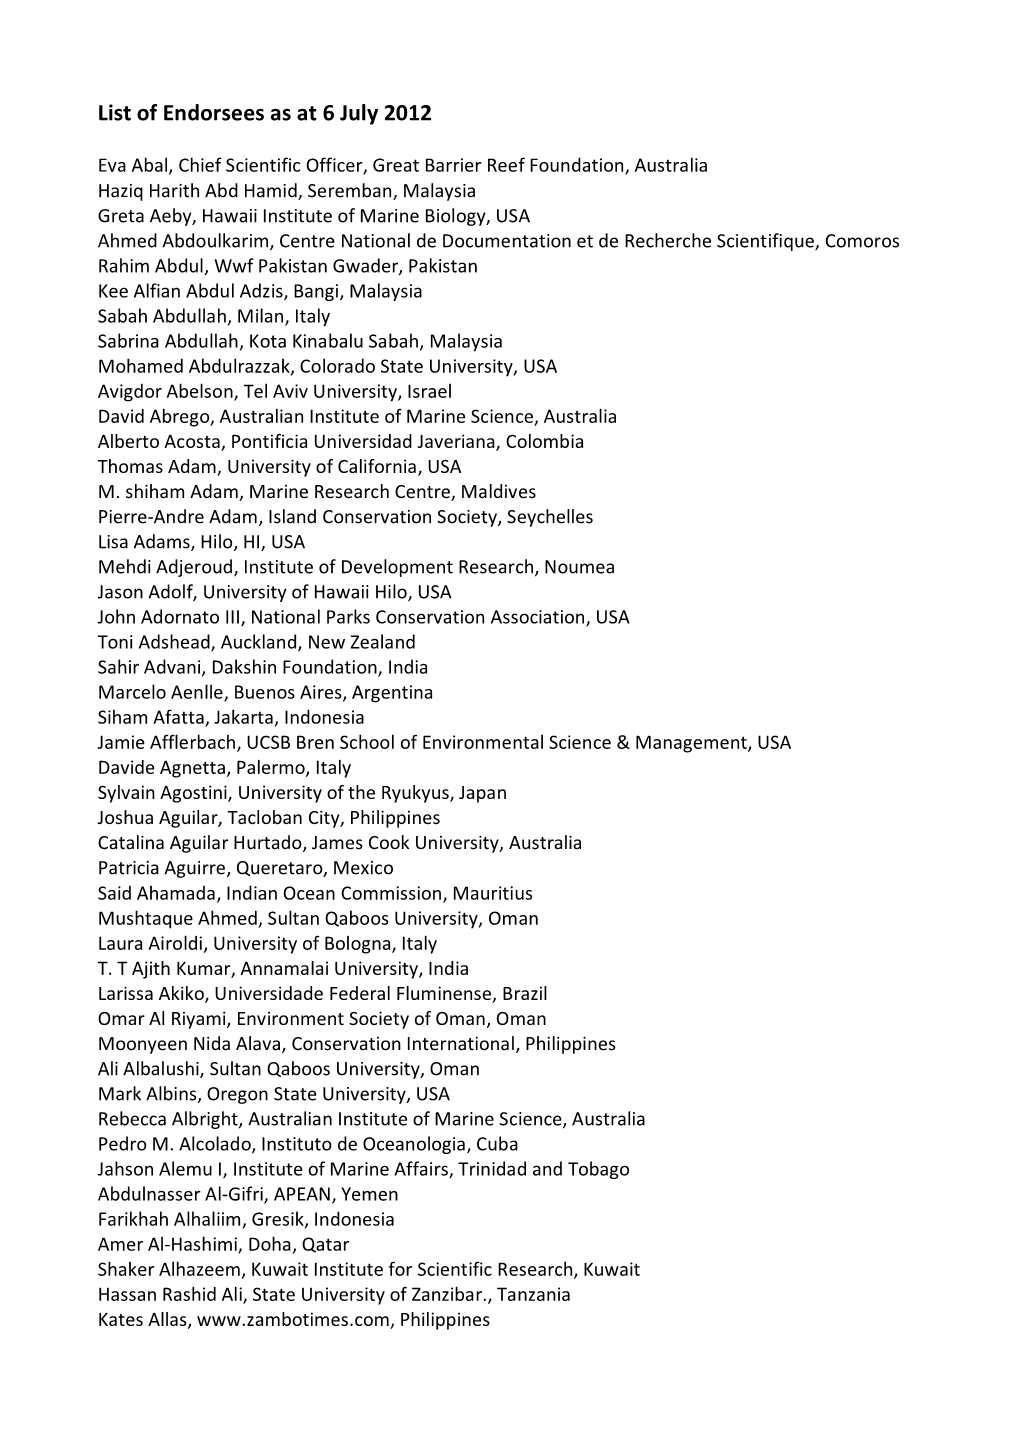 List of Endorsees As at 6 July 2012